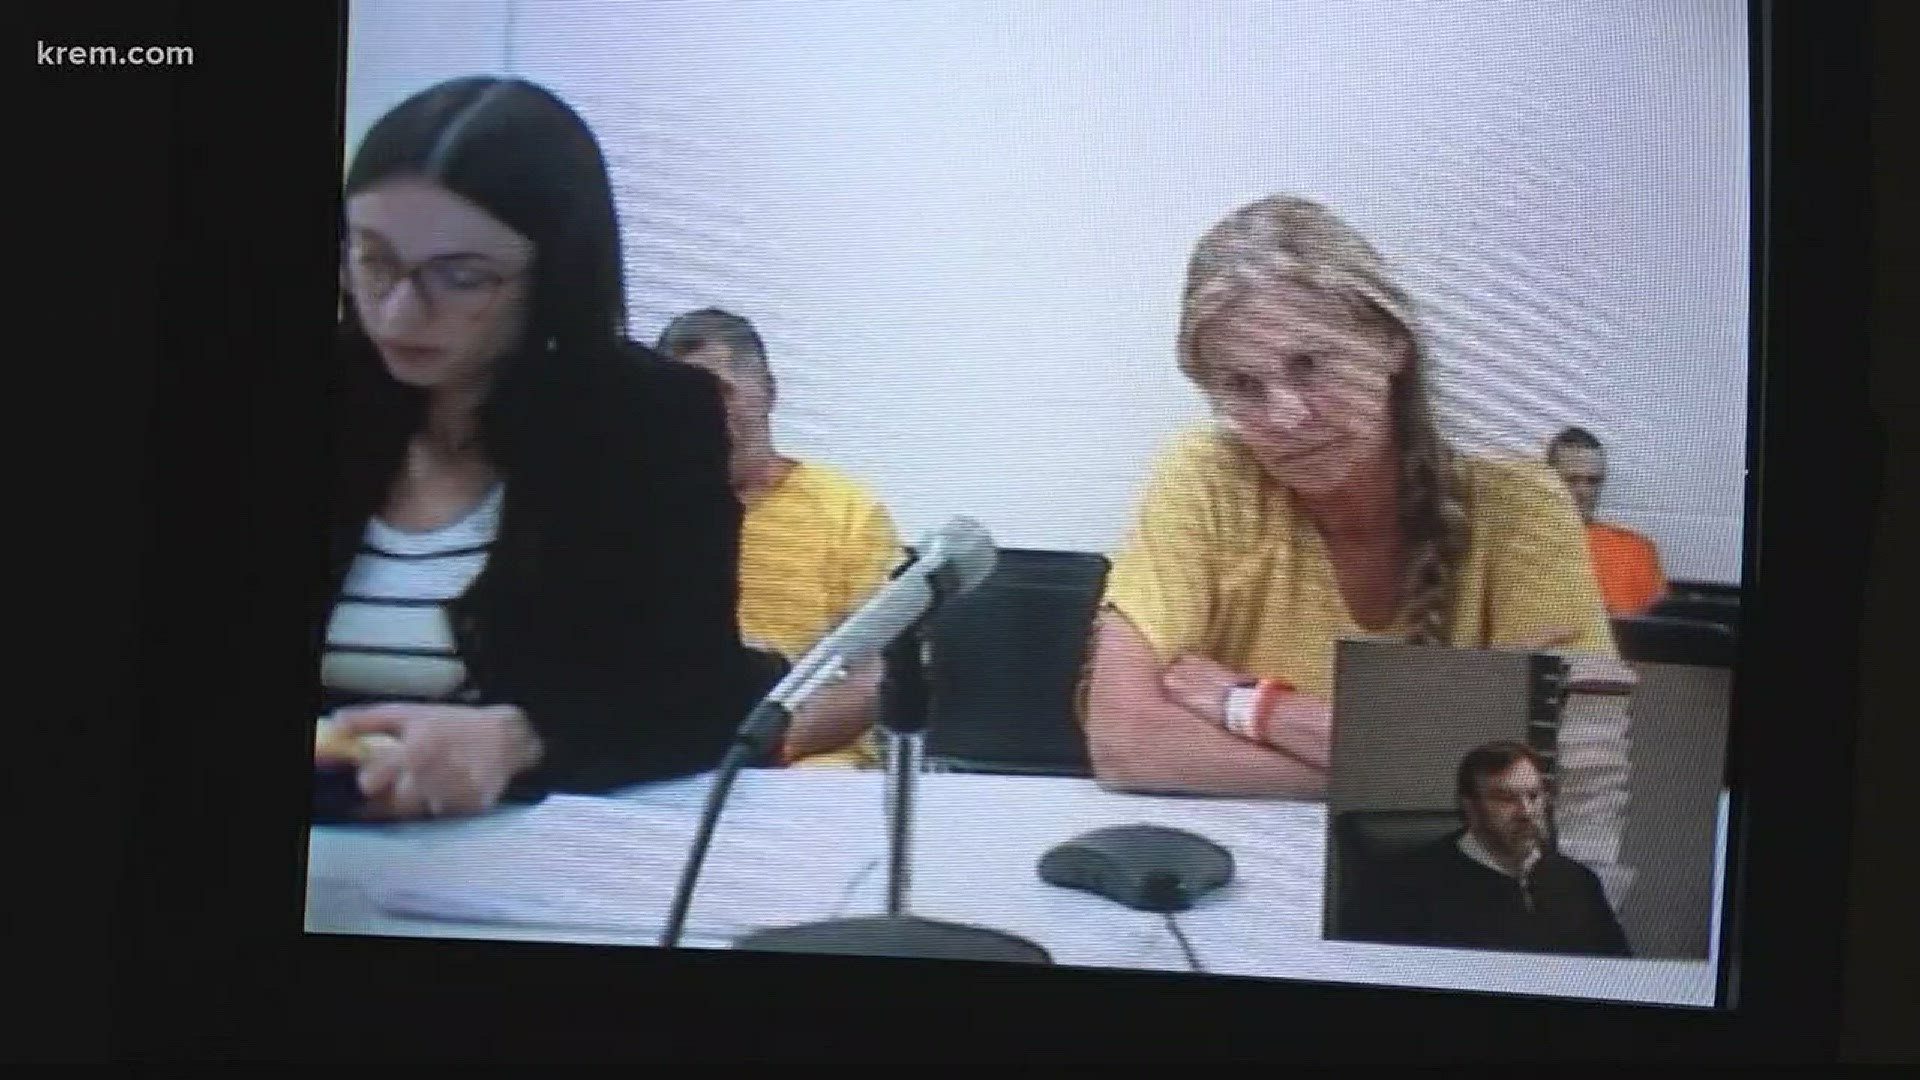 KREM 2's Amanda Roley was in court today as Isenberg faces a judge from the first time.